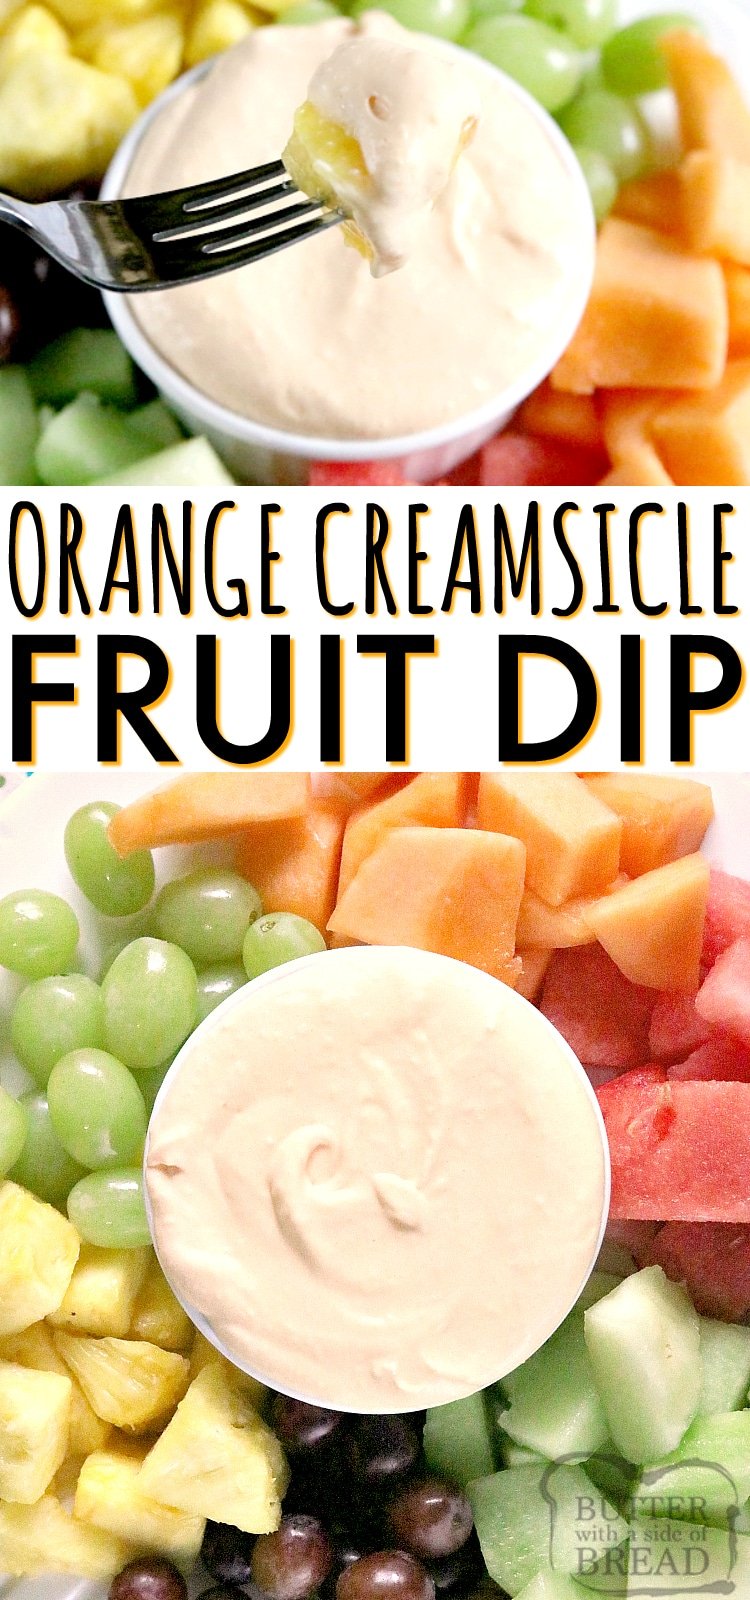 Orange Creamsicle Fruit Dip is sweet, delicious and bursting with orange flavor! This fruit dip recipe is very simple with only 3 ingredients, and it tastes amazing with all of your favorite fruits!